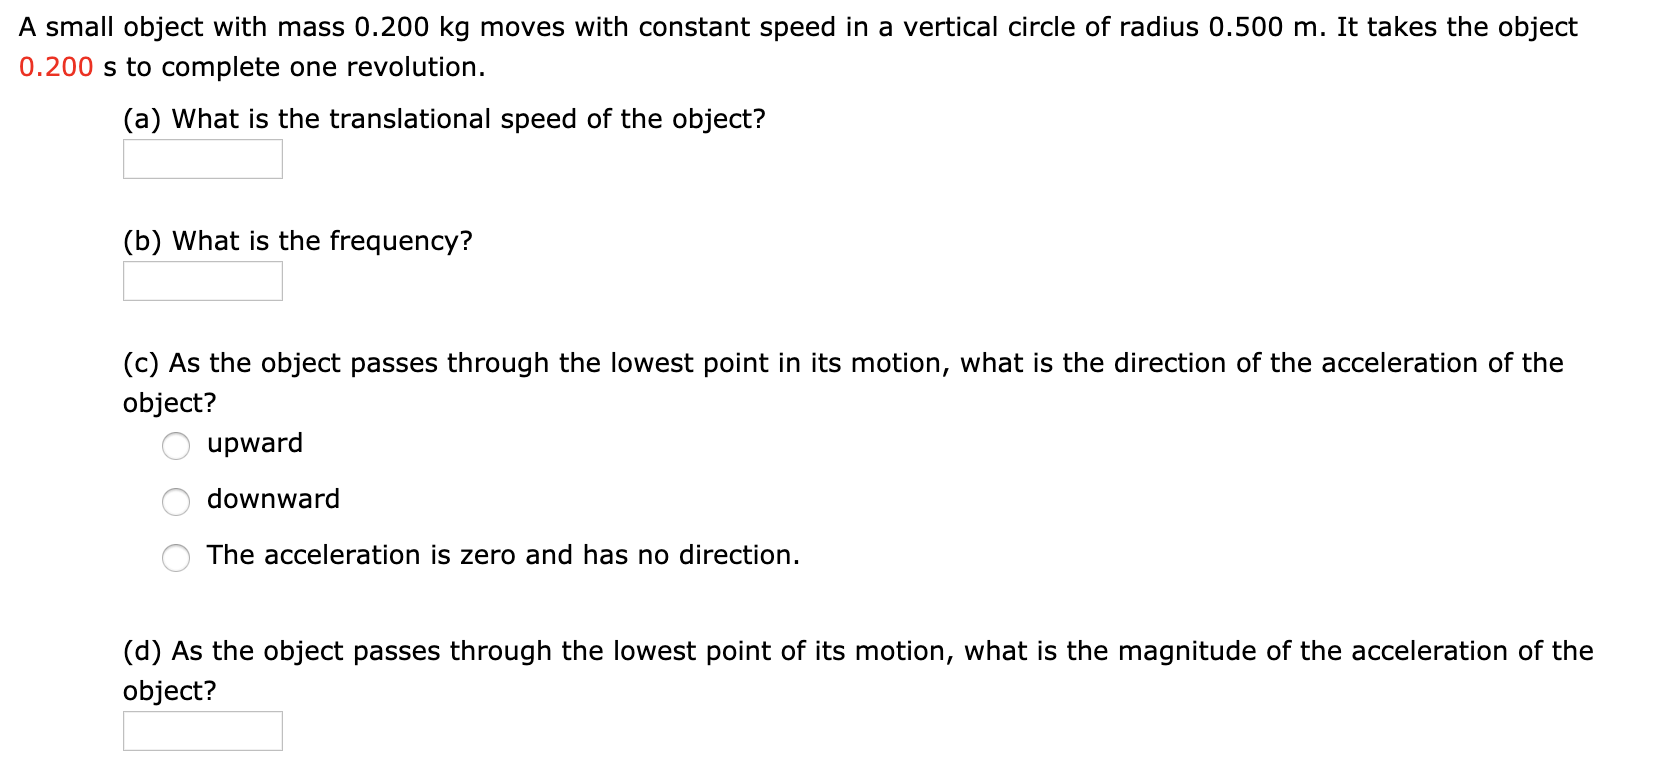 A small object with mass 0.200 kg moves with constant speed in a vertical circle of radius 0.500 m. It takes the object
0.200 s to complete one revolution
(a) What is the translational speed of the object?
(b) What is the frequency?
(c) As the object passes through the lowest point in its motion, what is the direction of the acceleration of the
object?
upward
downward
The acceleration is zero and has no direction.
(d) As the object passes through the lowest point of its motion, what is the magnitude of the acceleration of the
object?
